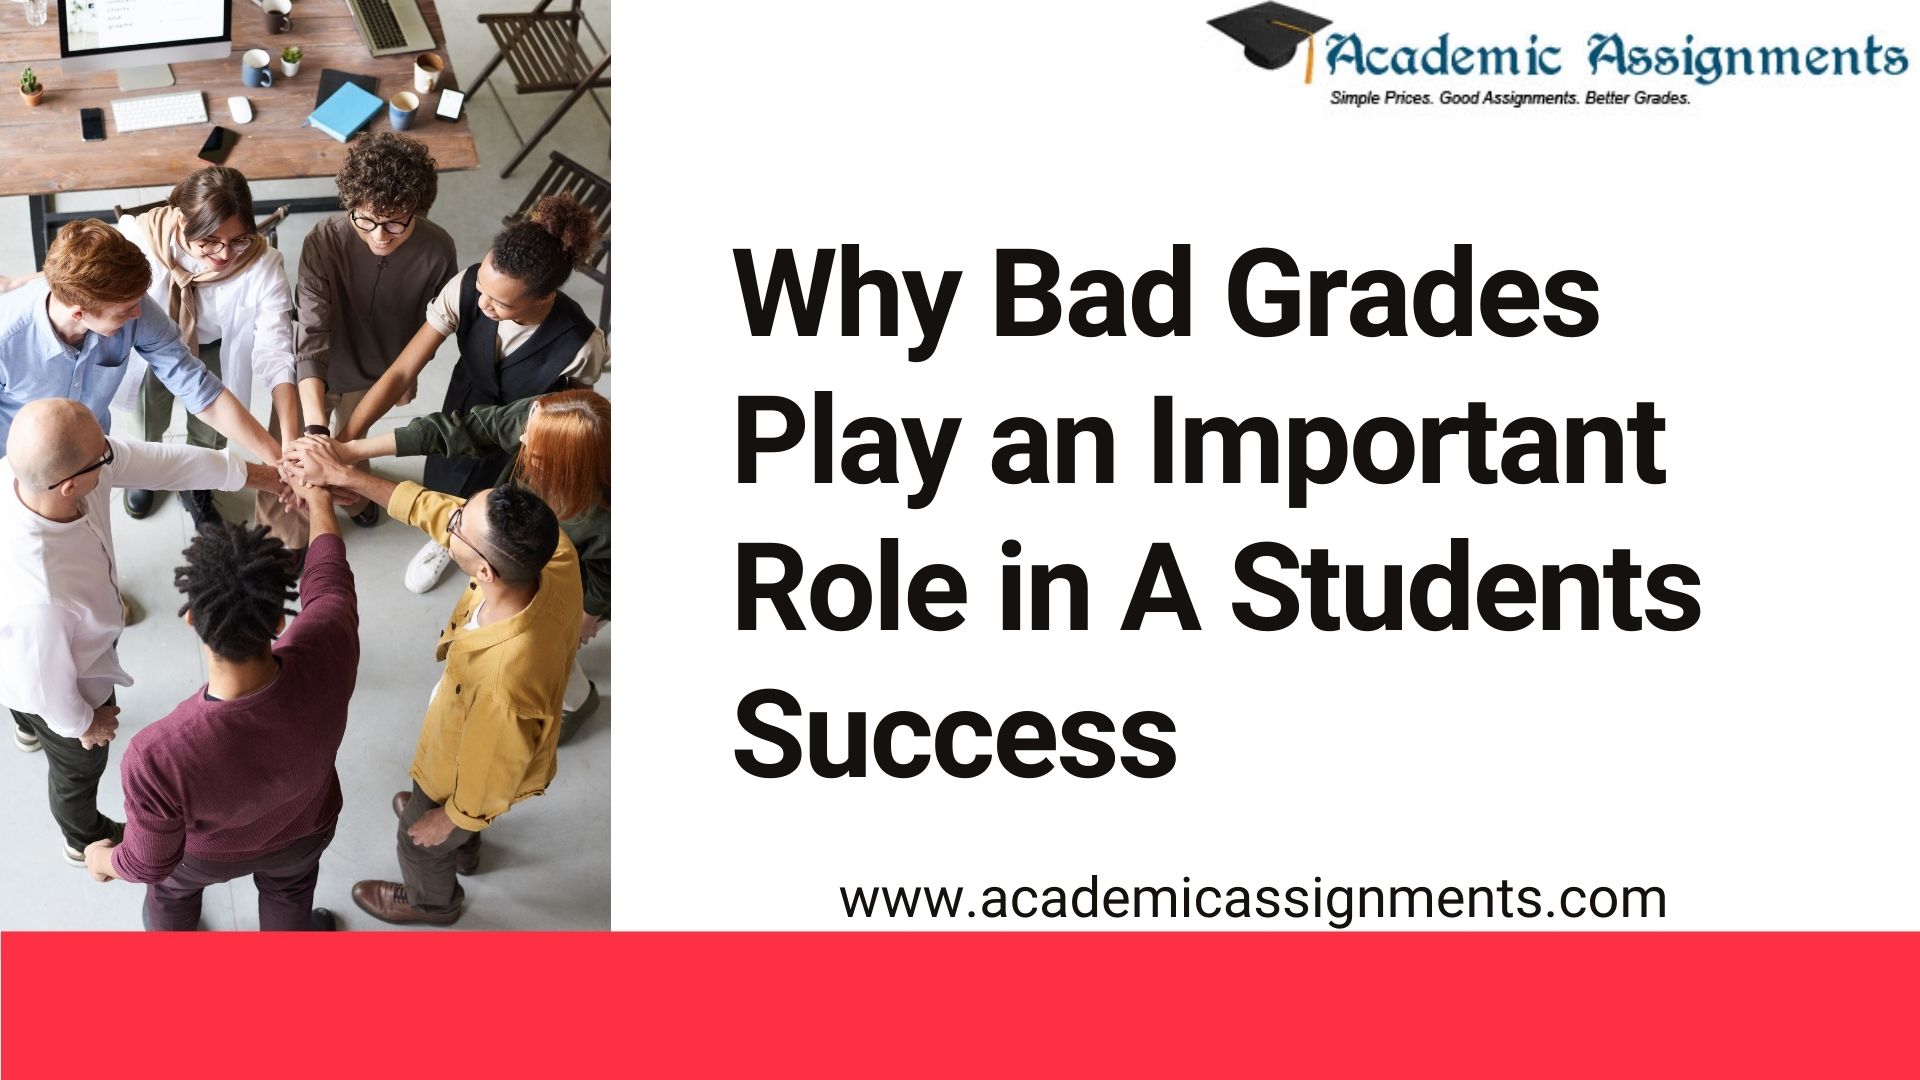 Why Bad Grades Play an Important Role in A Students Success